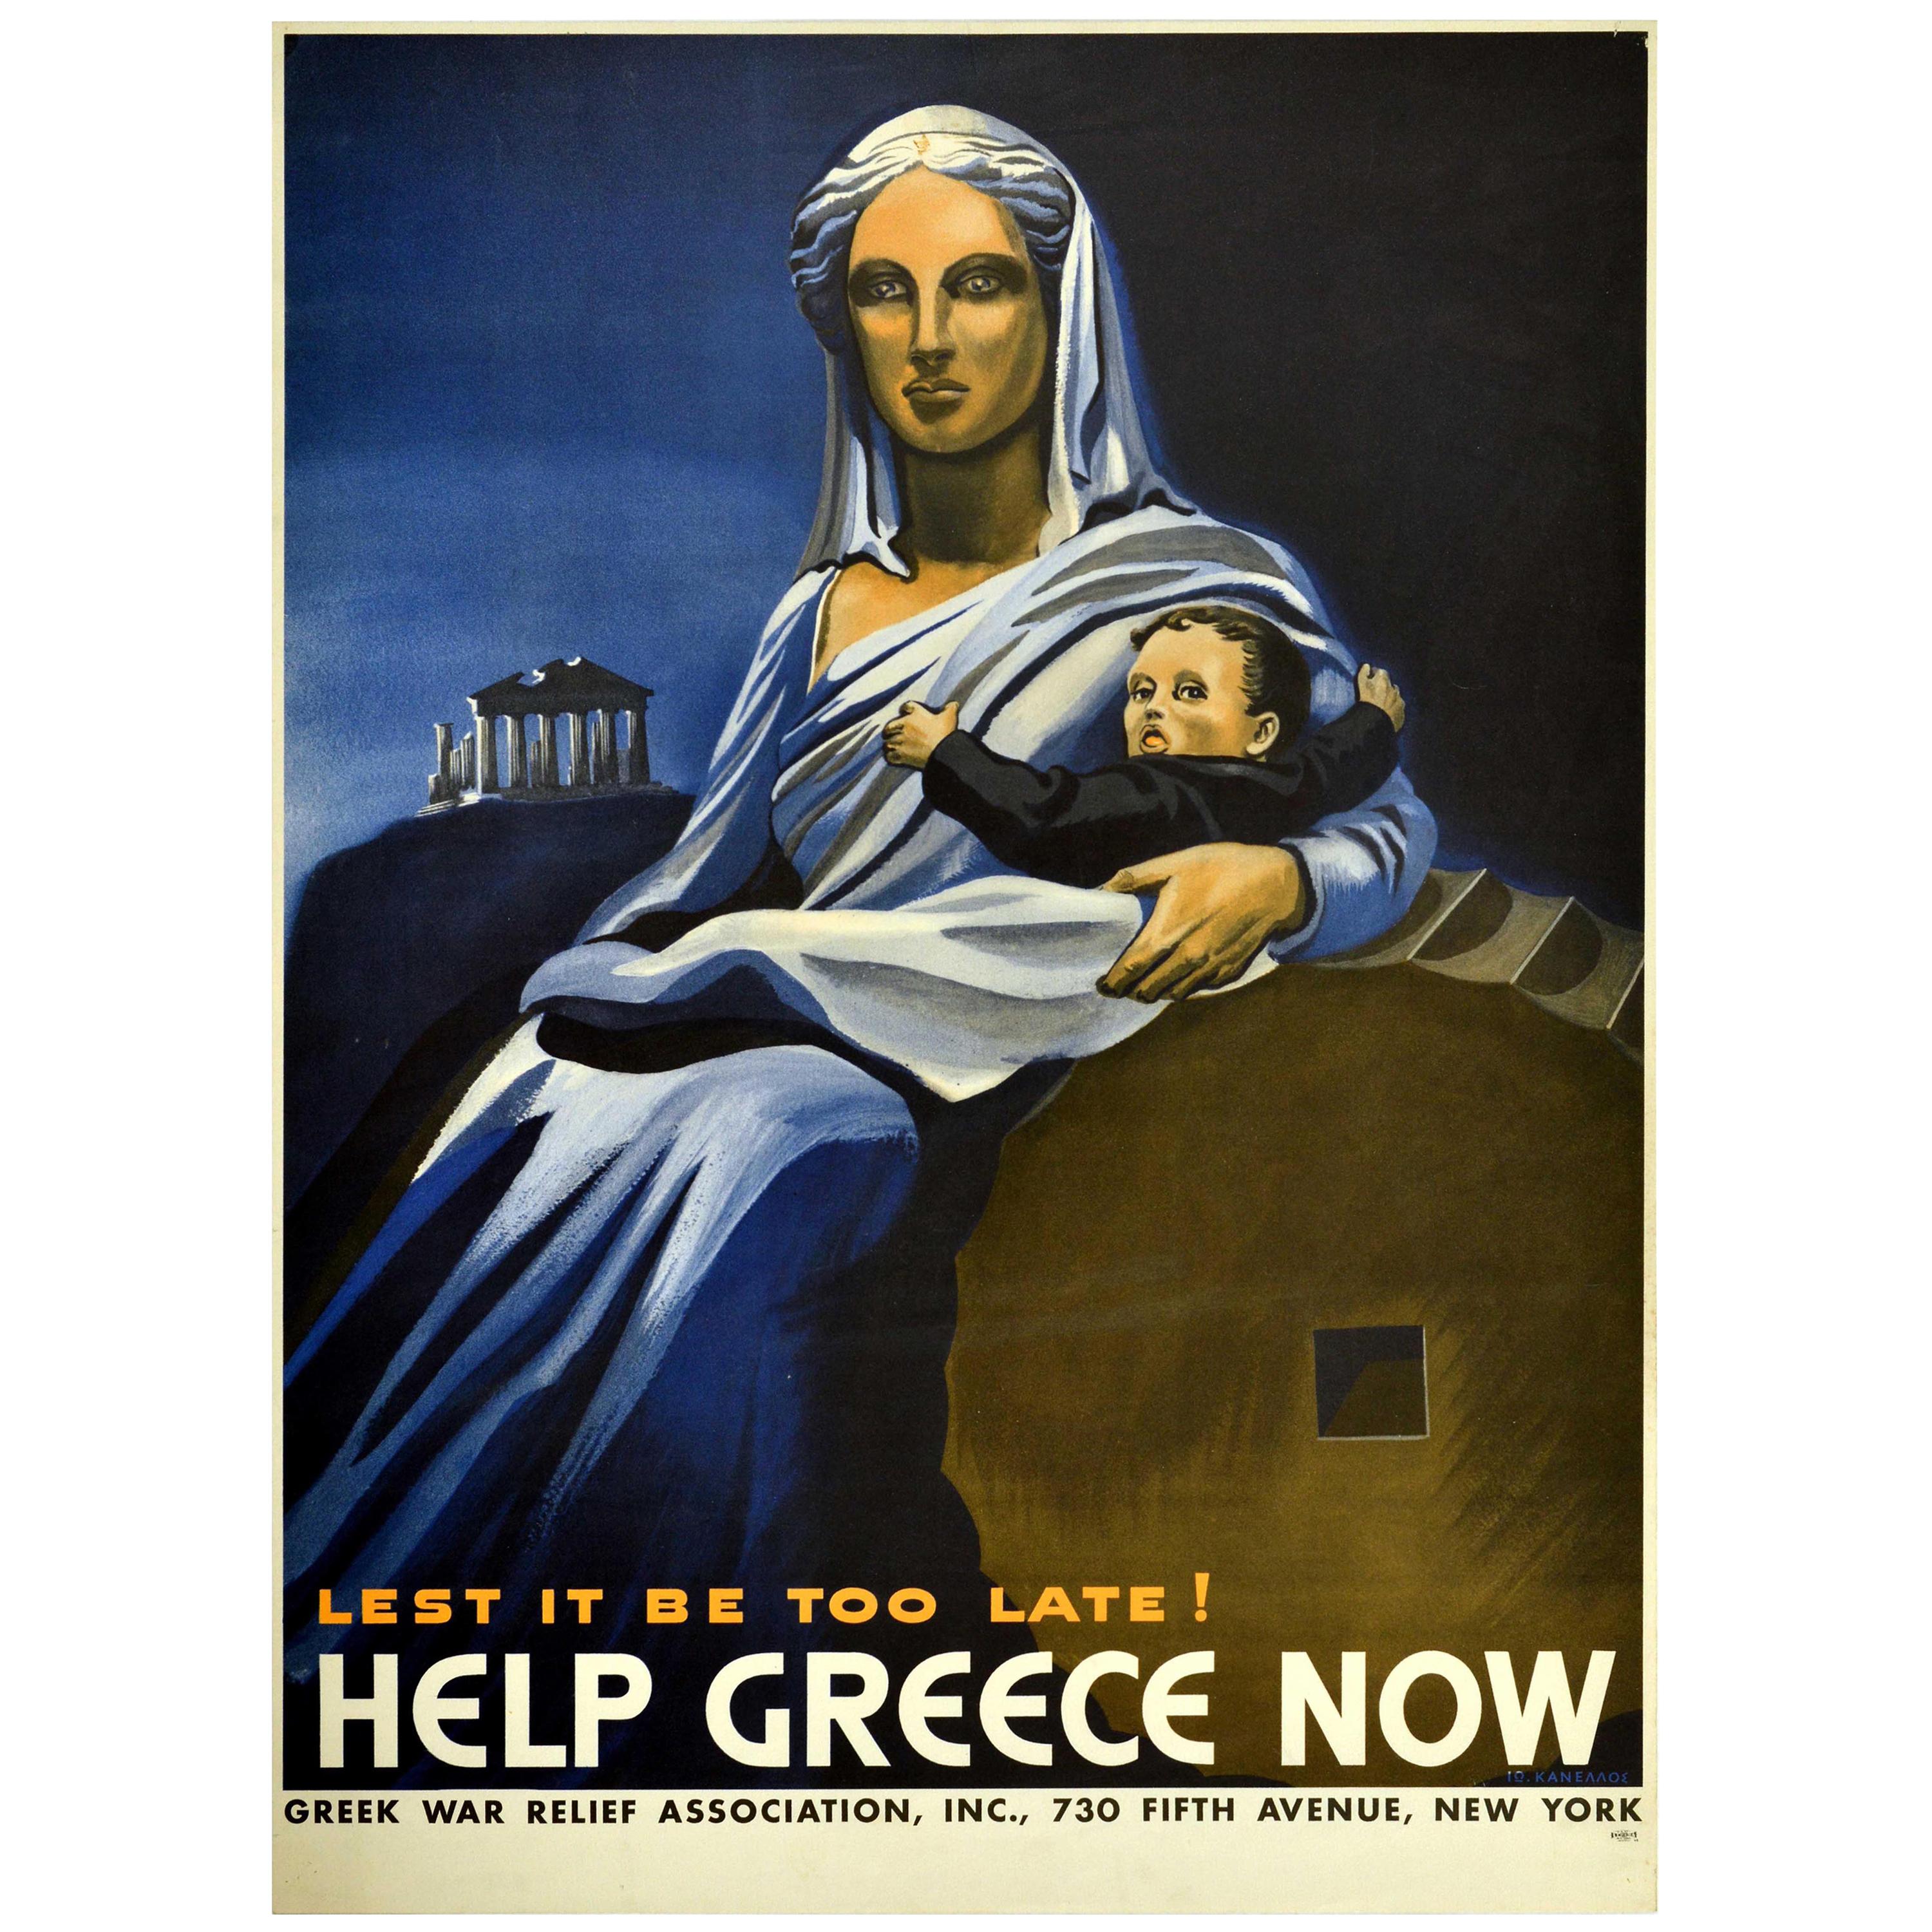 Original Vintage Poster Lest It Be Too Late Help Greece Now WWII War Relief Fund